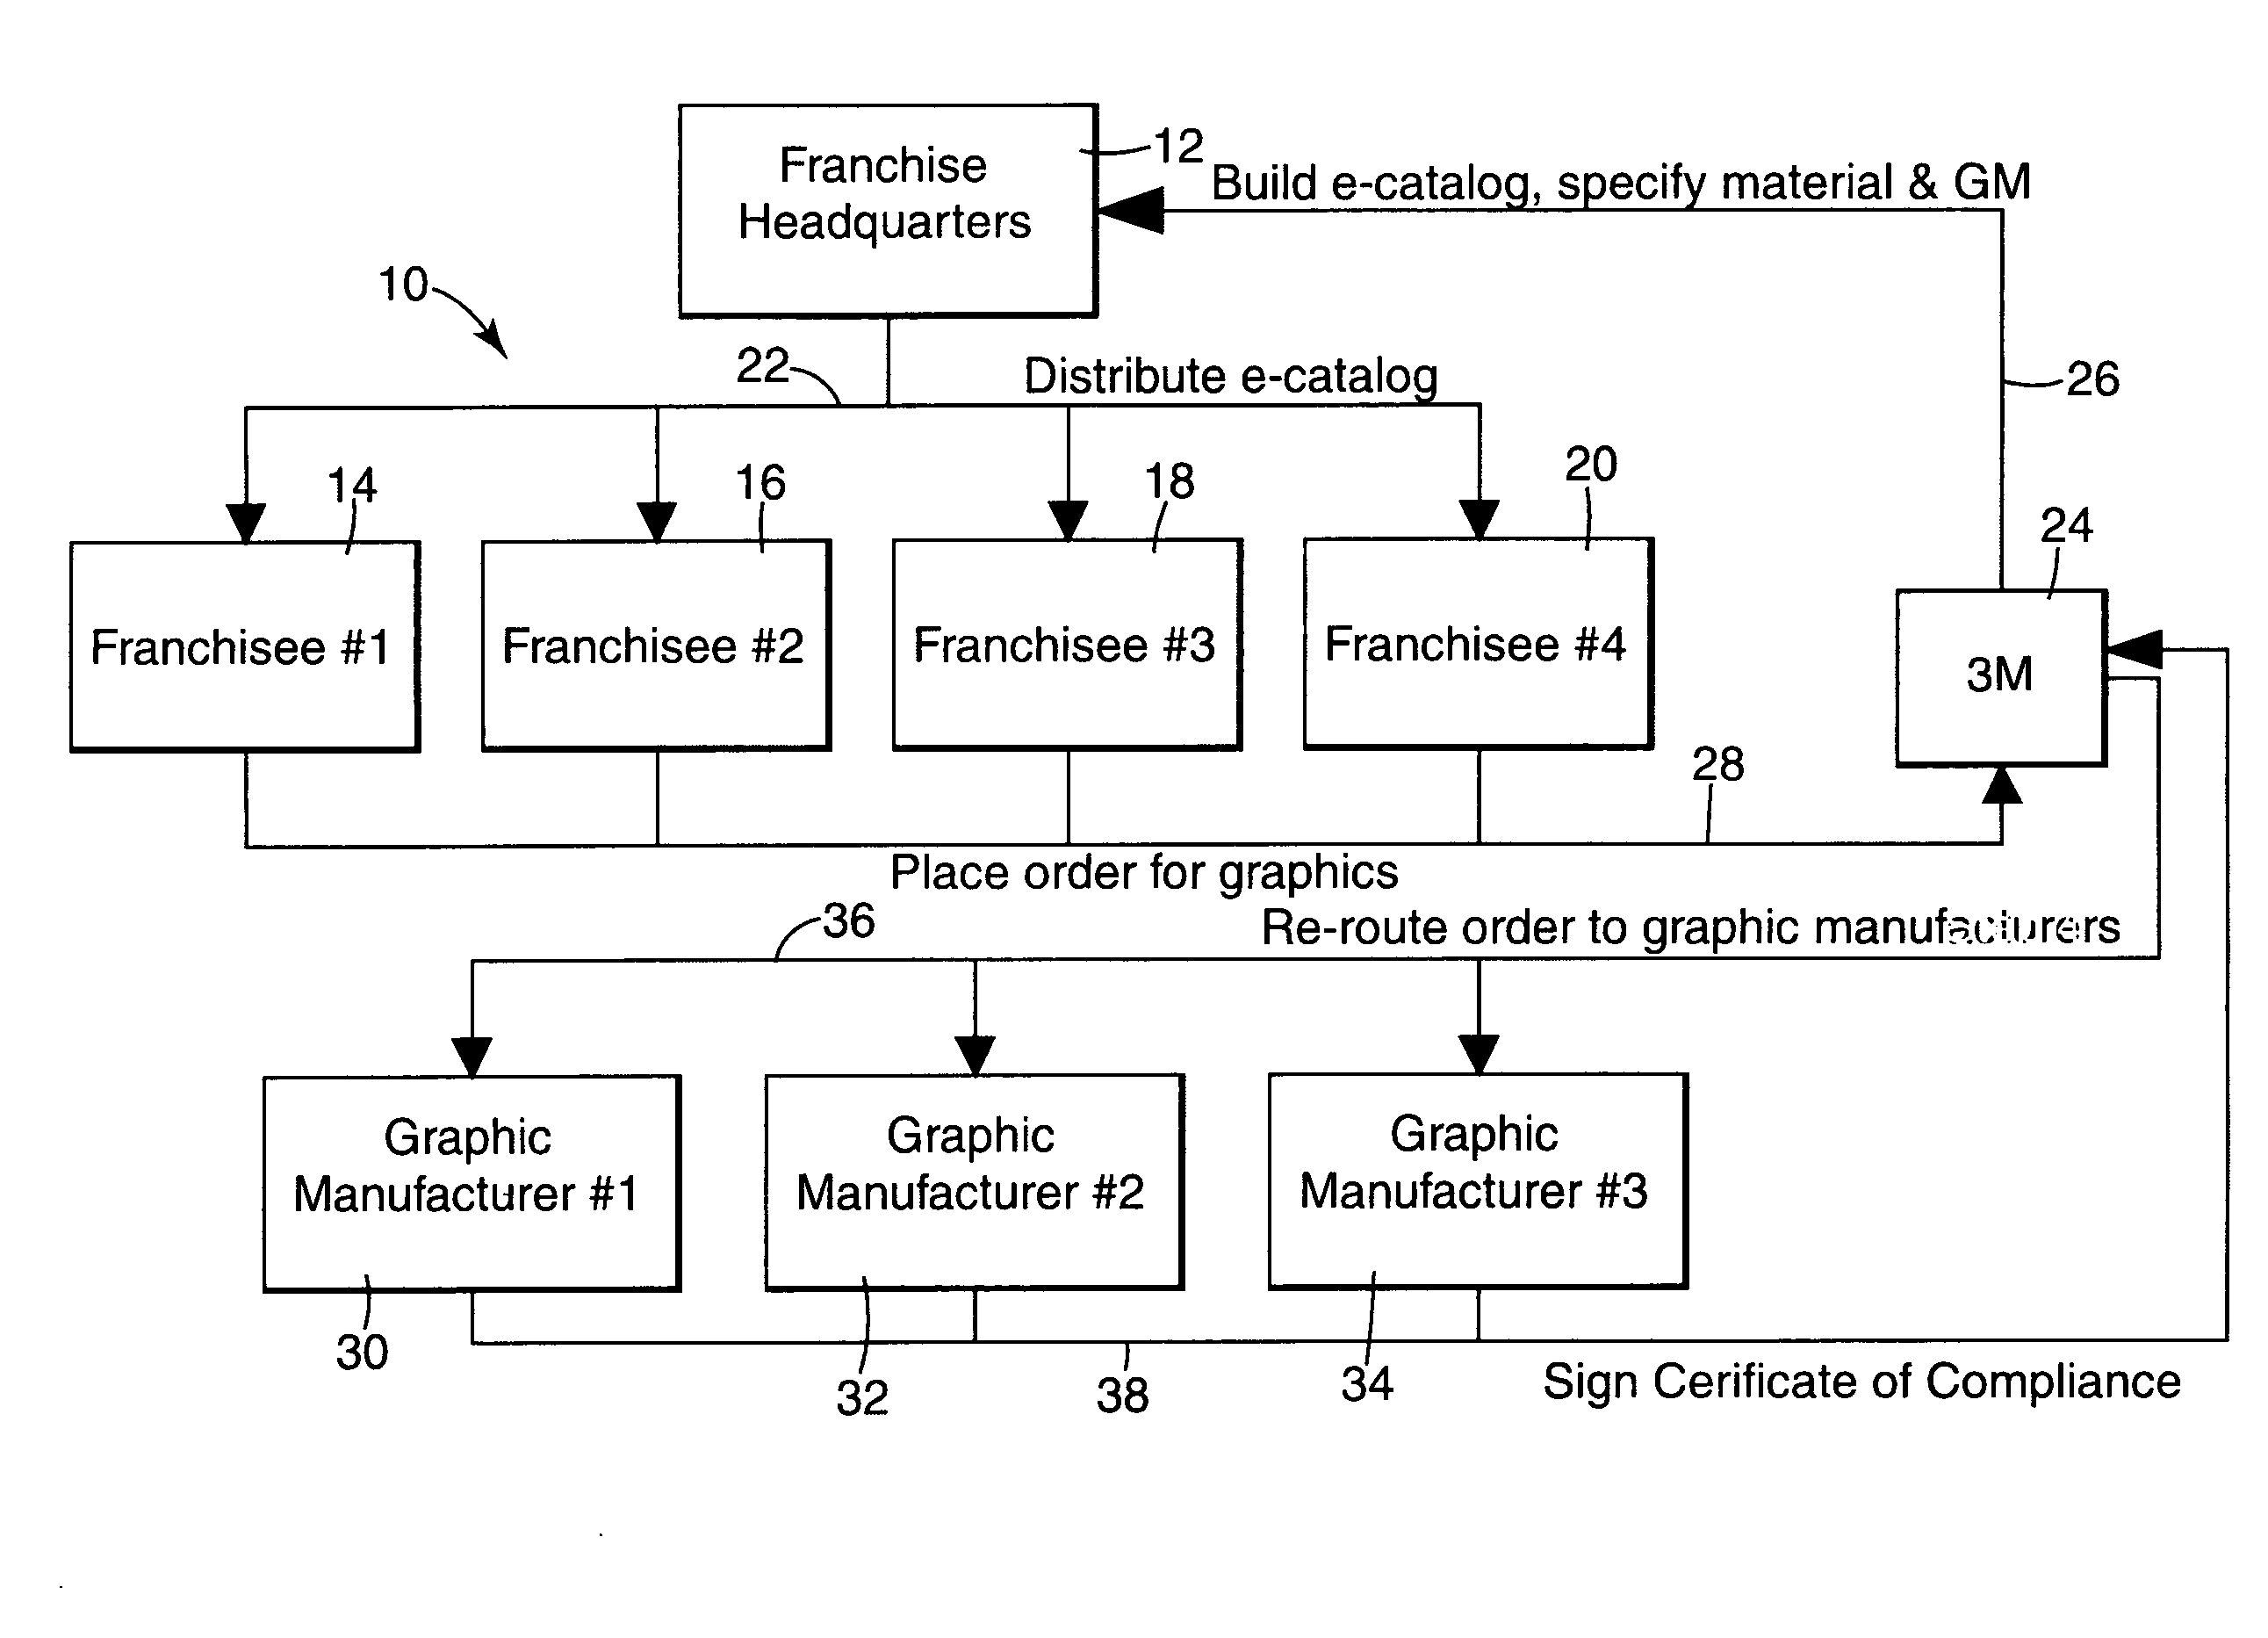 System for third party management of product manufacture ordering by a franchise based upon approved products of franchisor